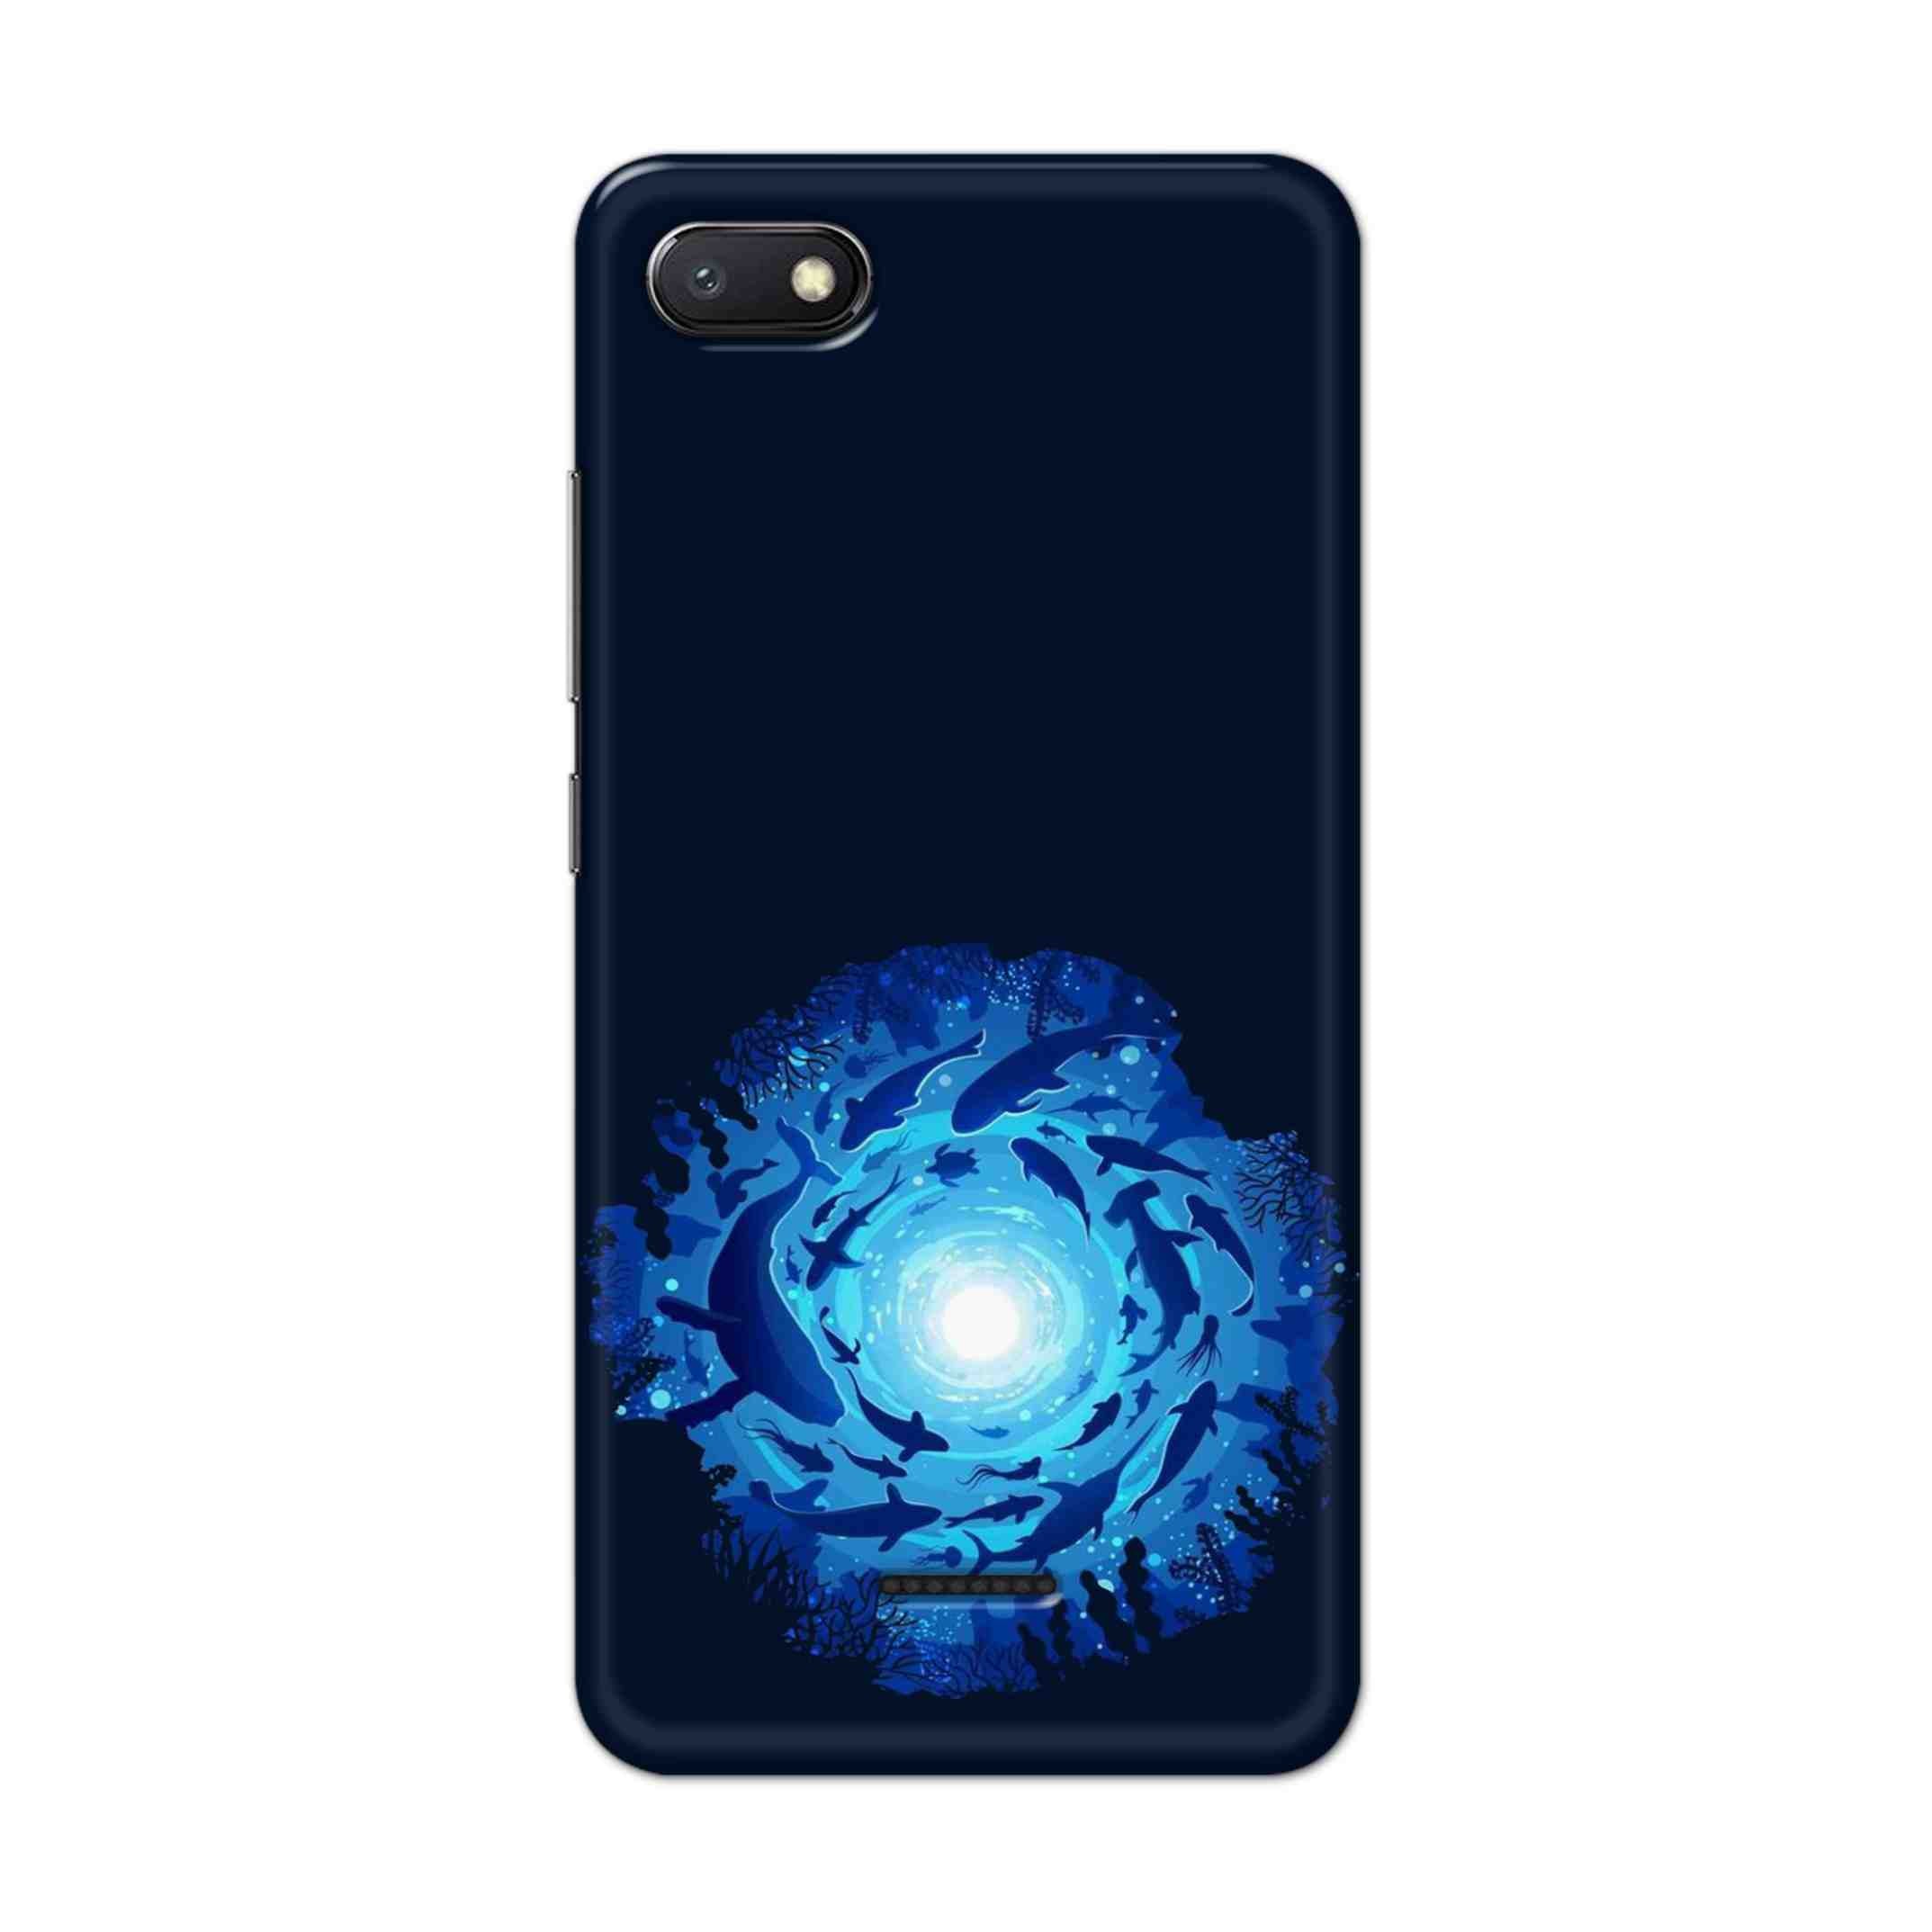 Buy Blue Whale Hard Back Mobile Phone Case/Cover For Xiaomi Redmi 6A Online